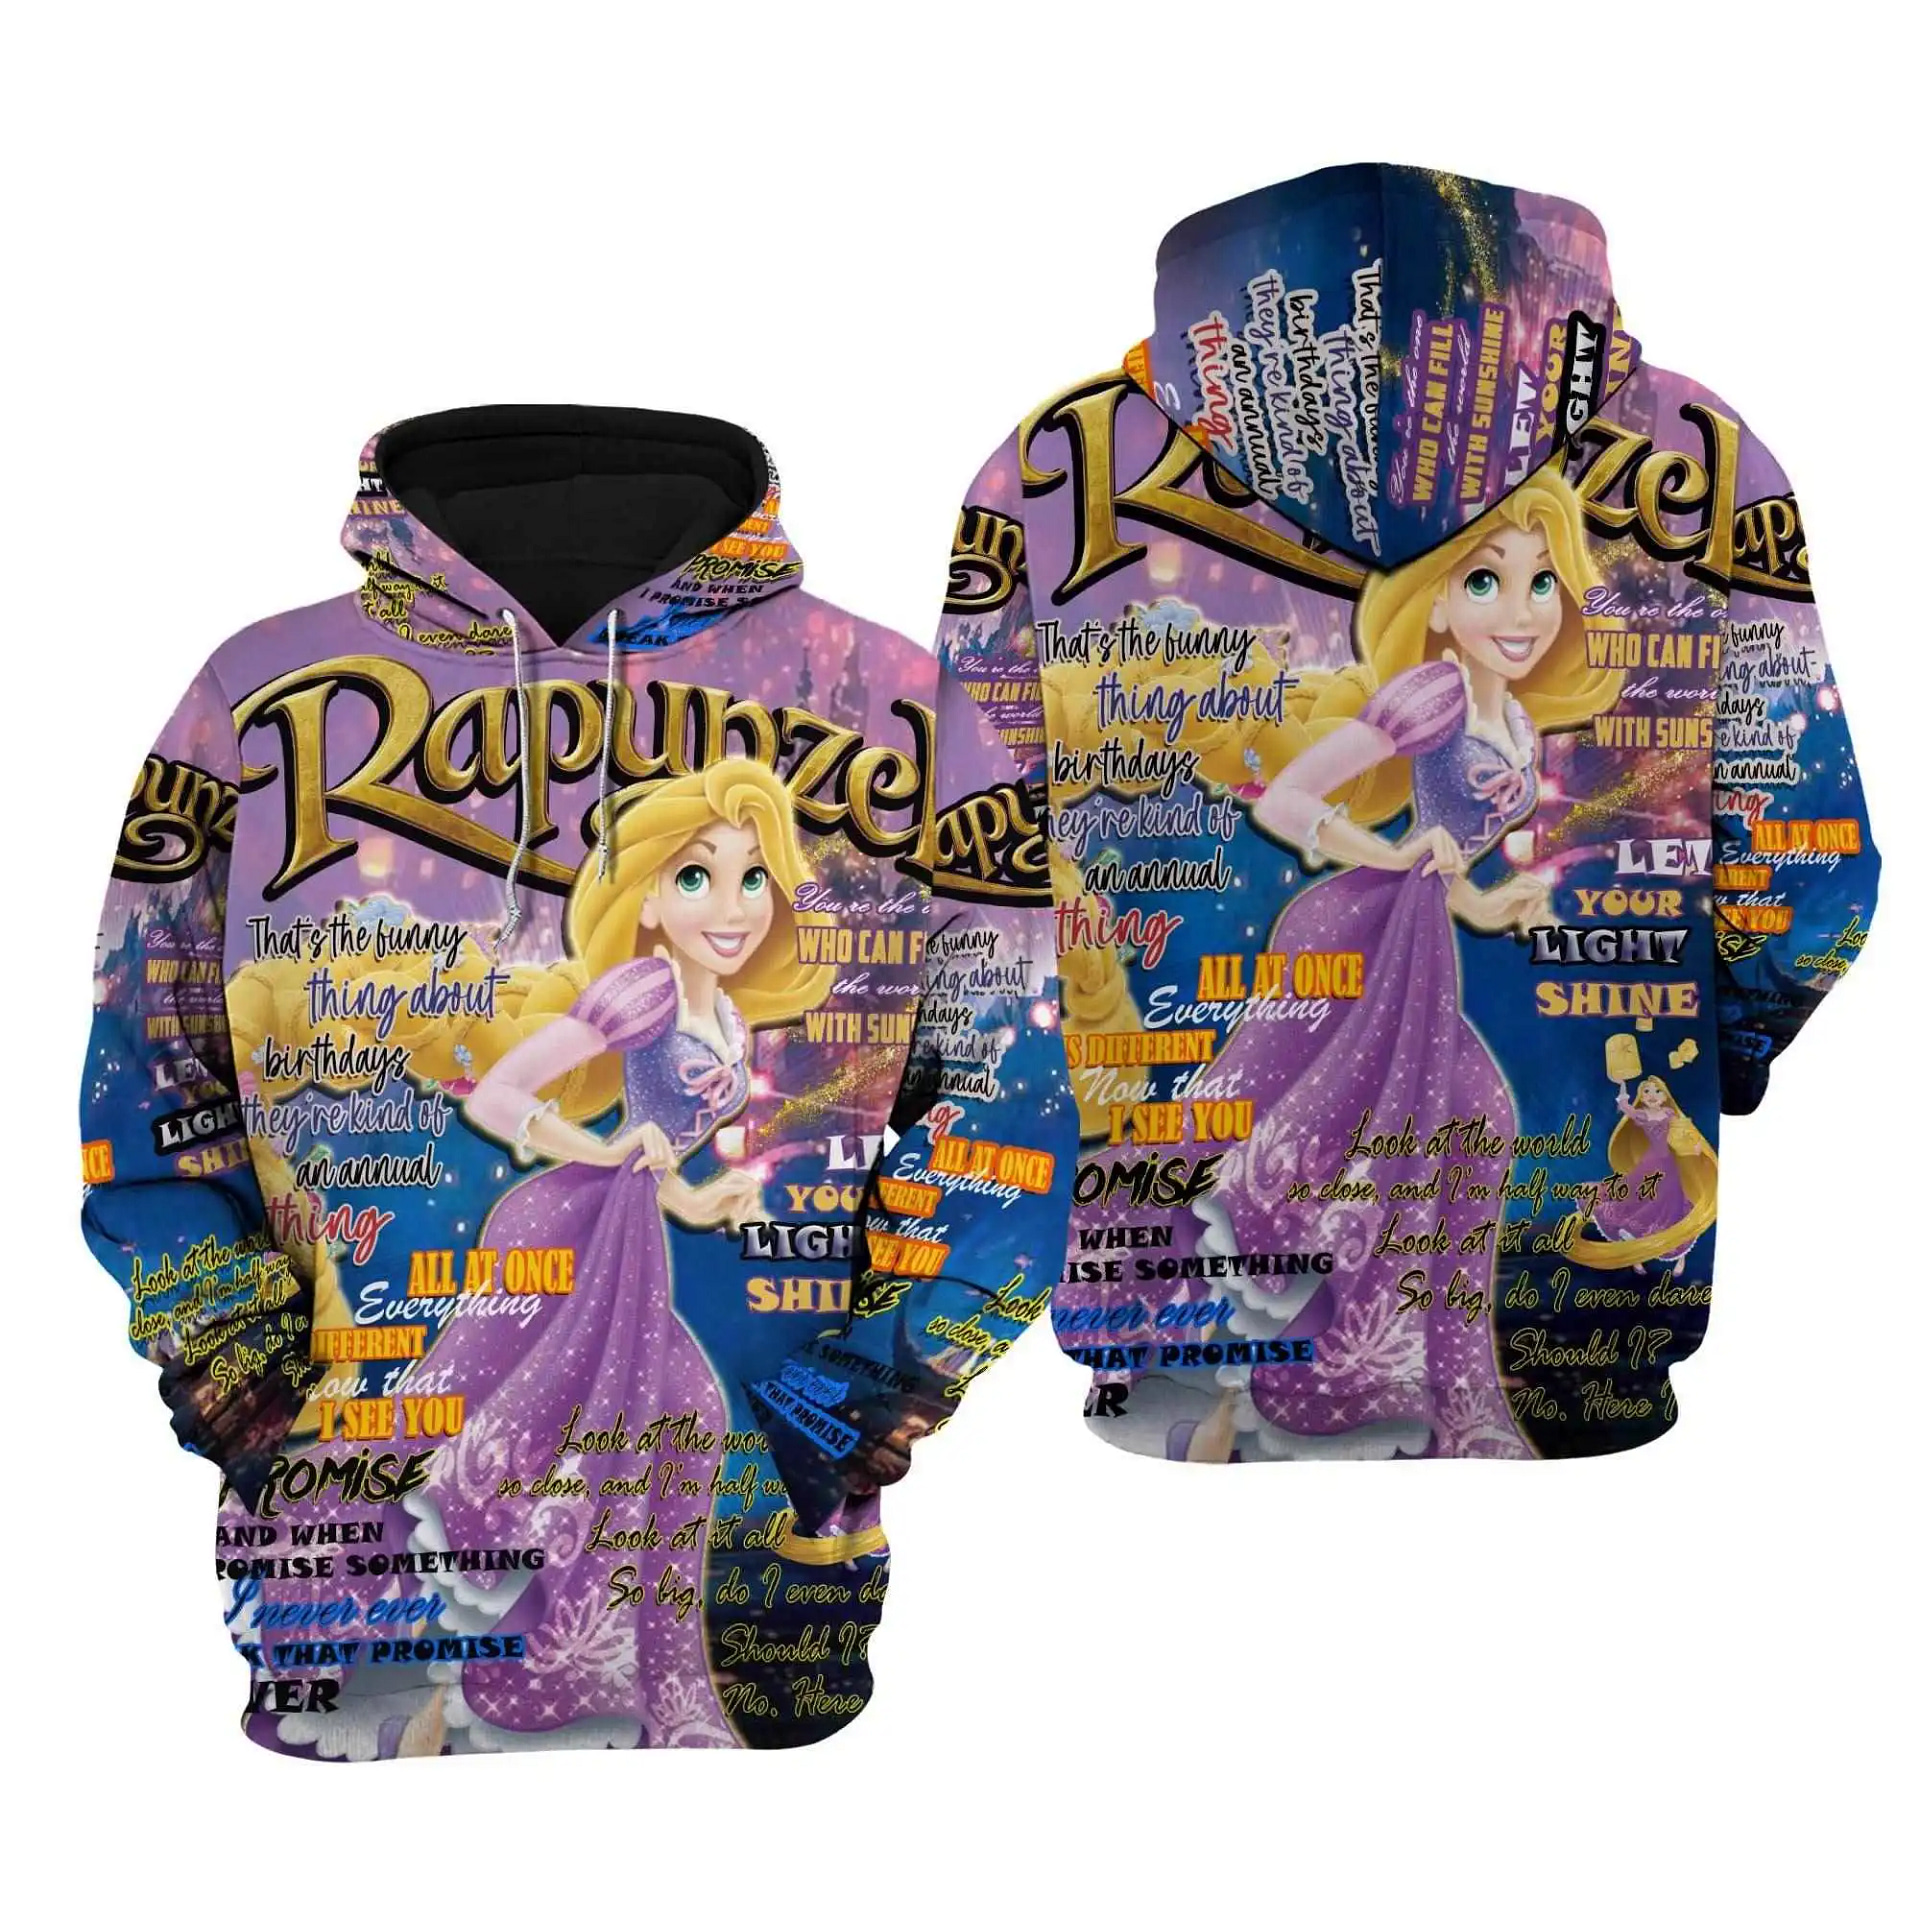 Rapunzel Punk Words Pattern Disney Quotes Cartoon Graphic Outfits Clothing Men Women Kids Toddlers Hoodie 3D